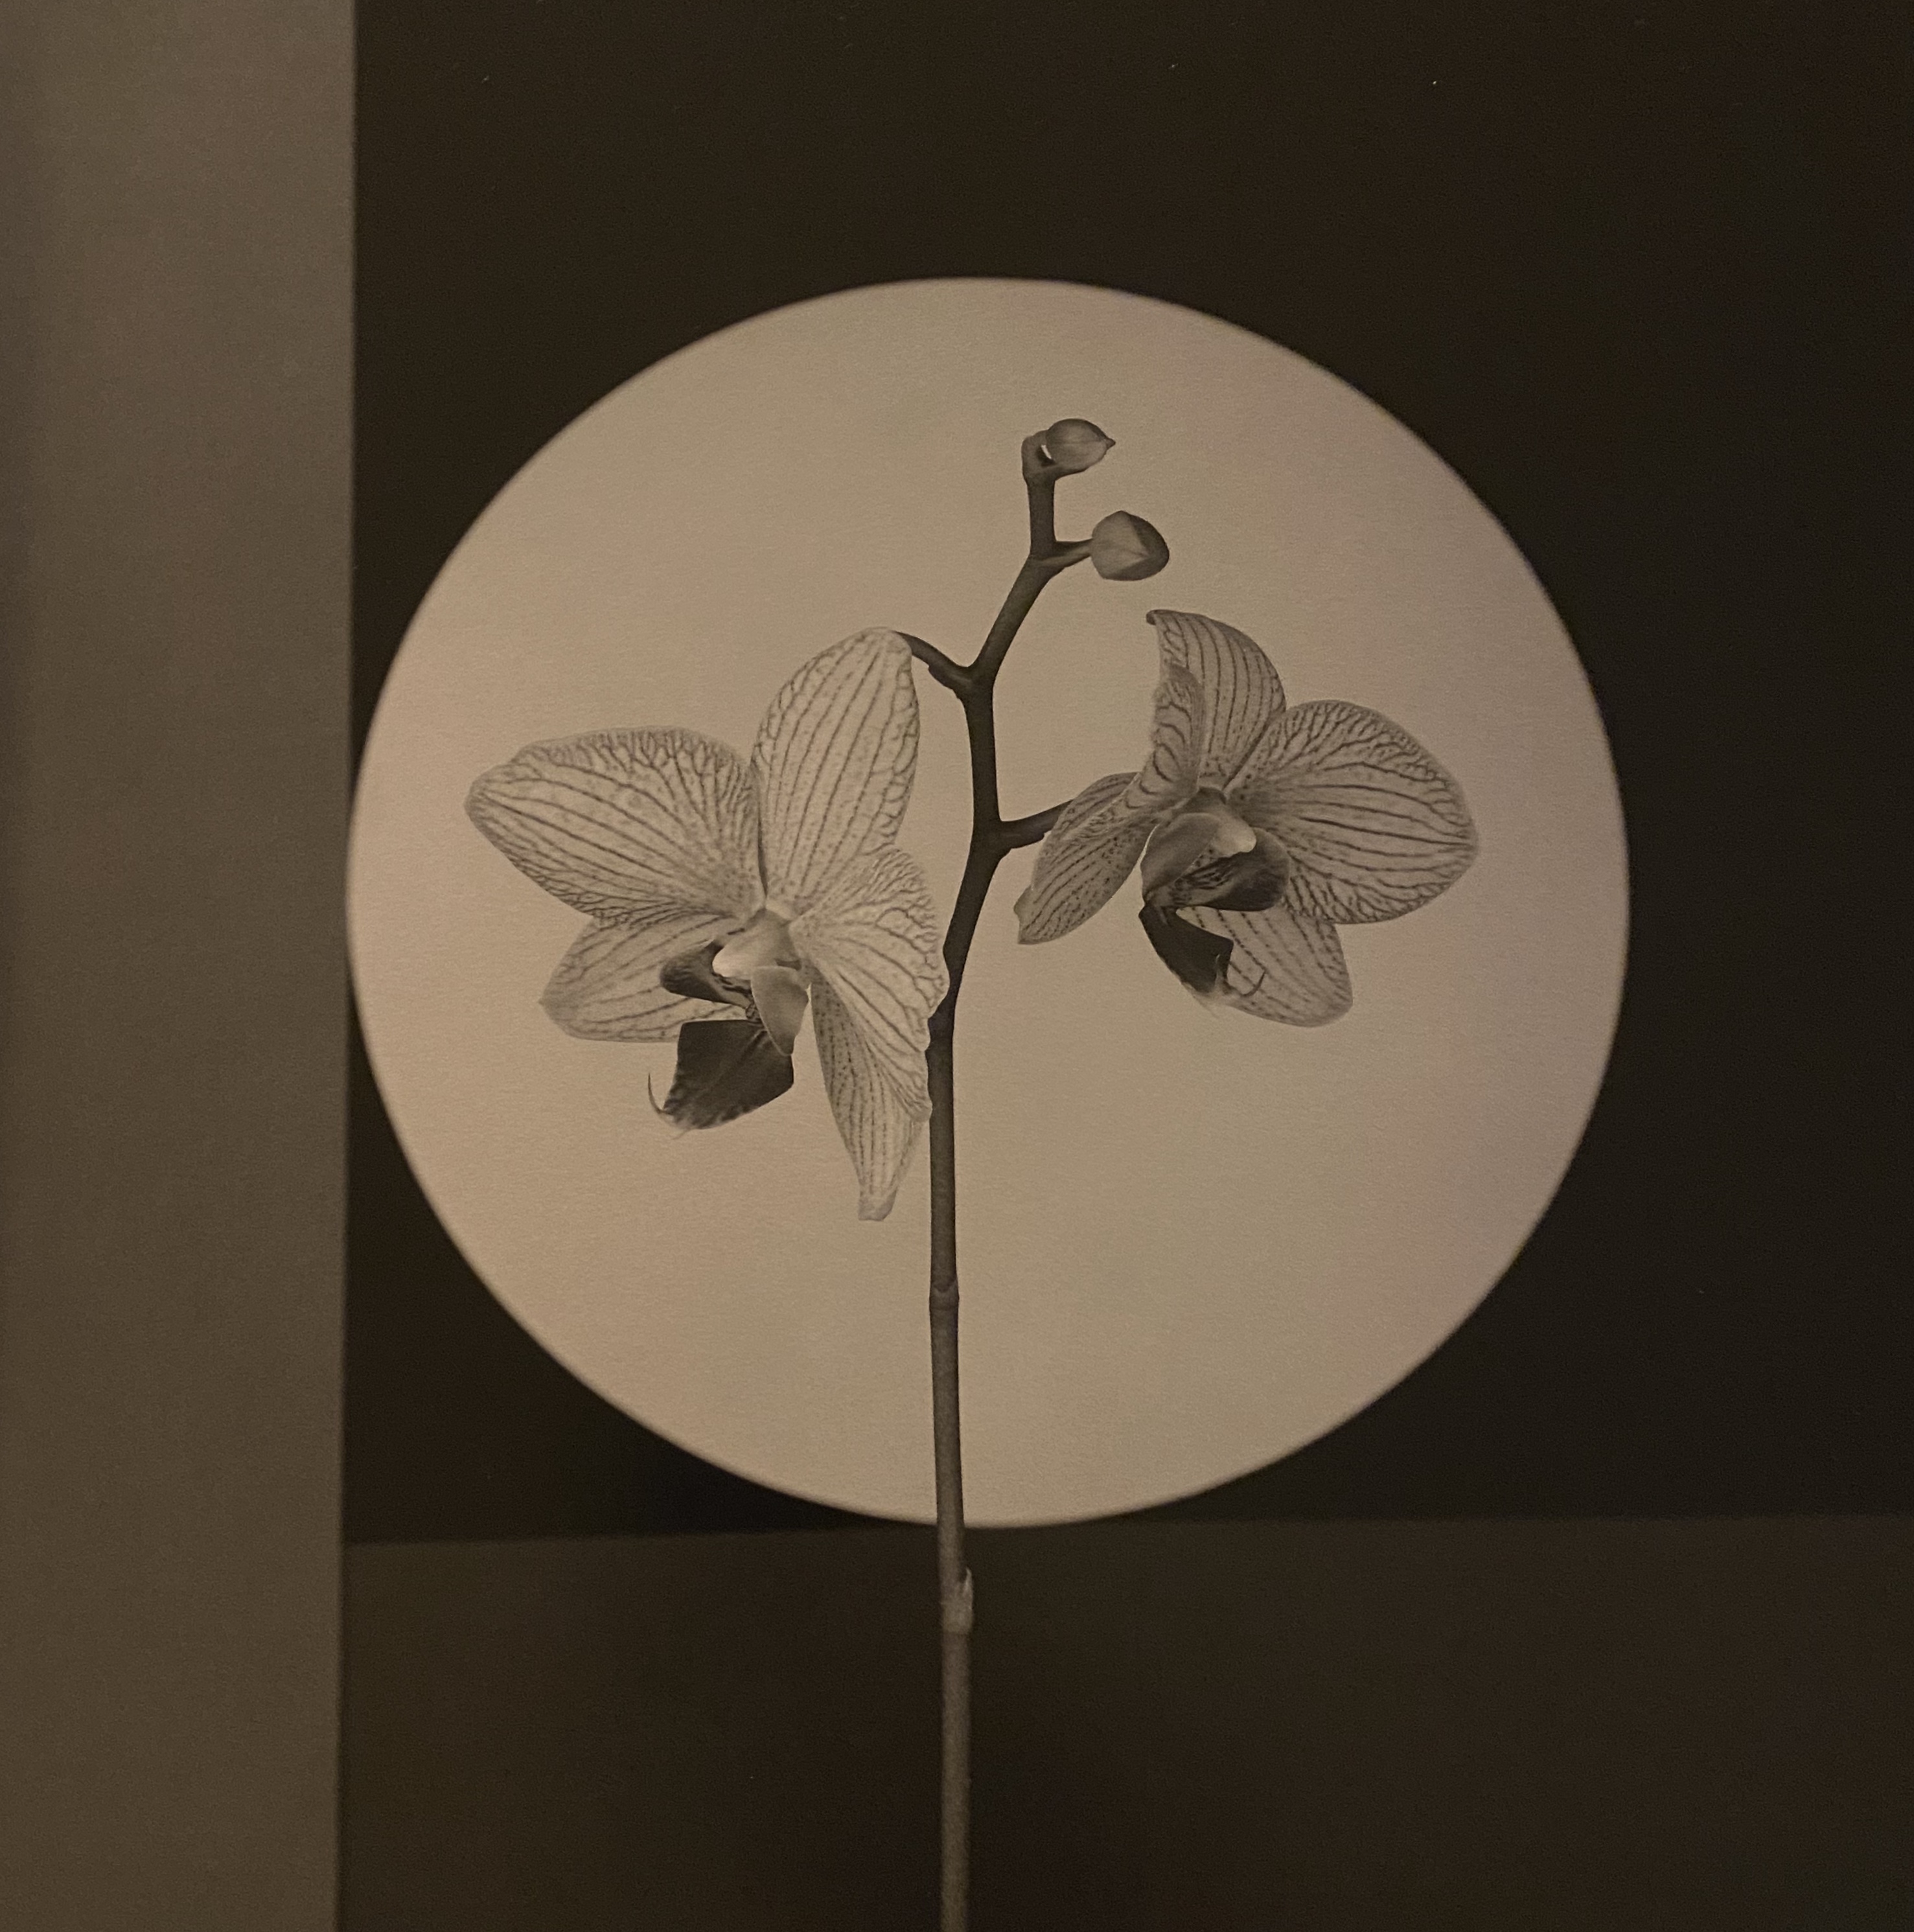 Two orchids on a geometric backdrop